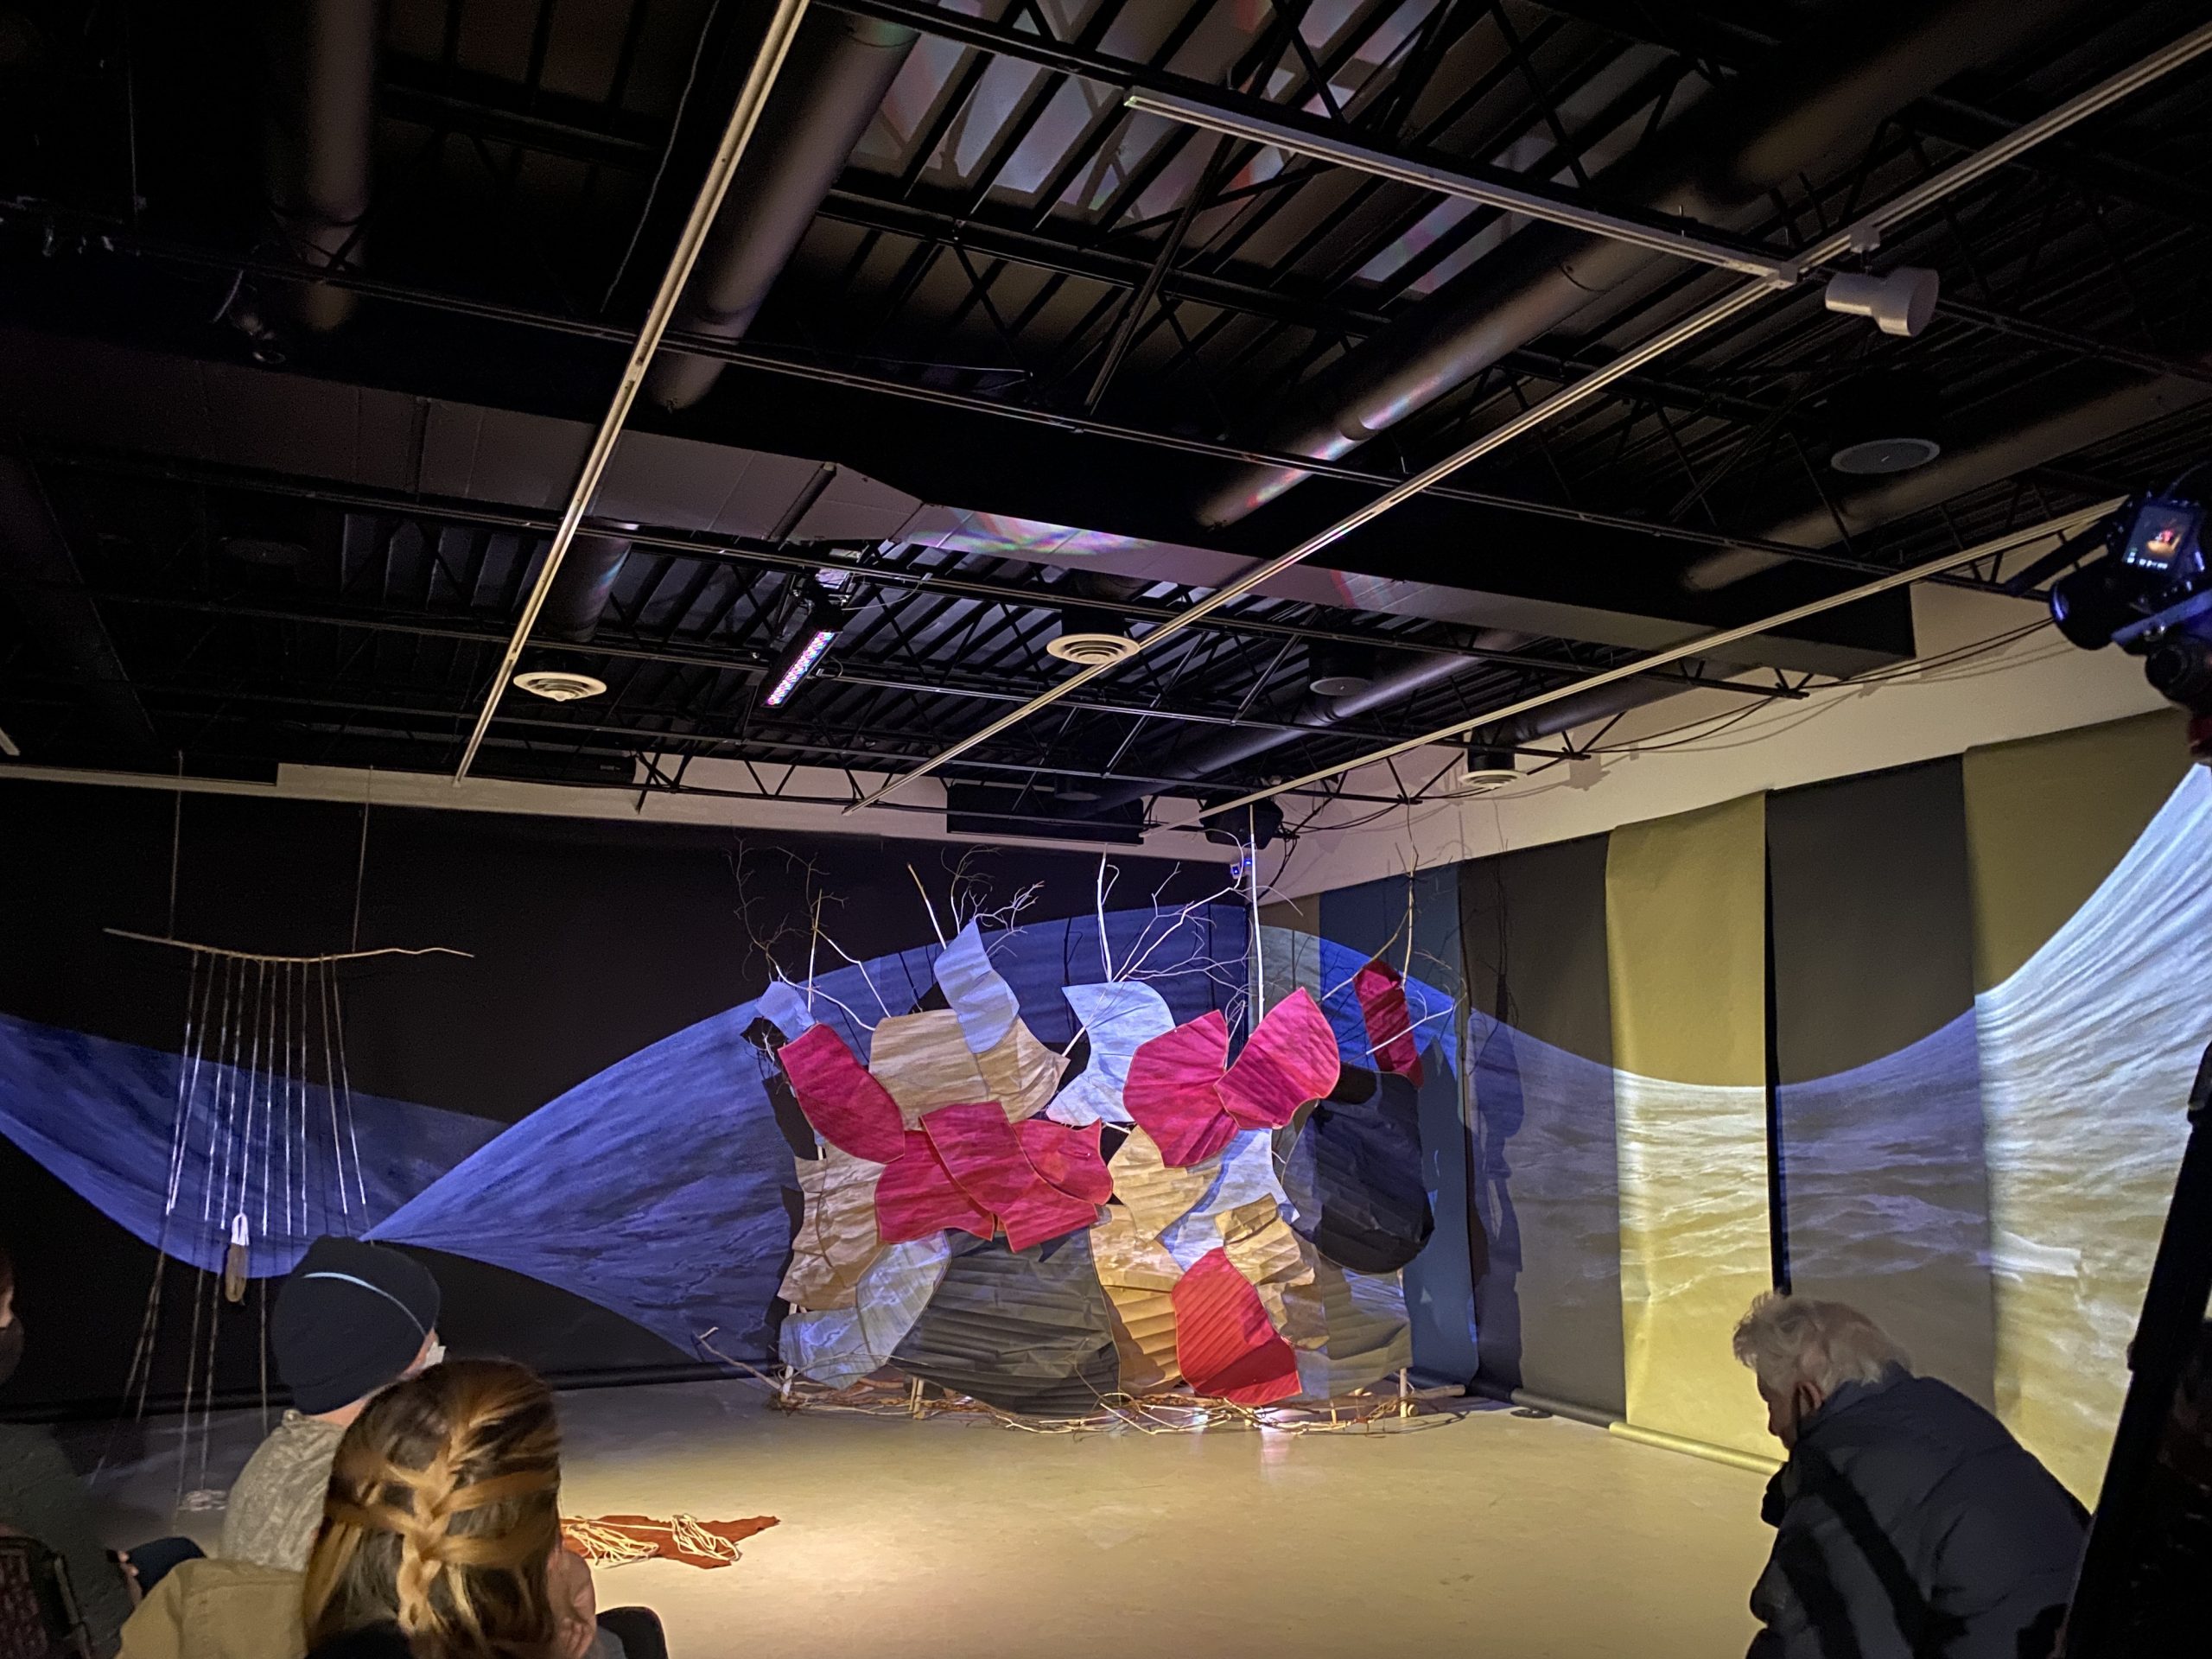 dance space with projection